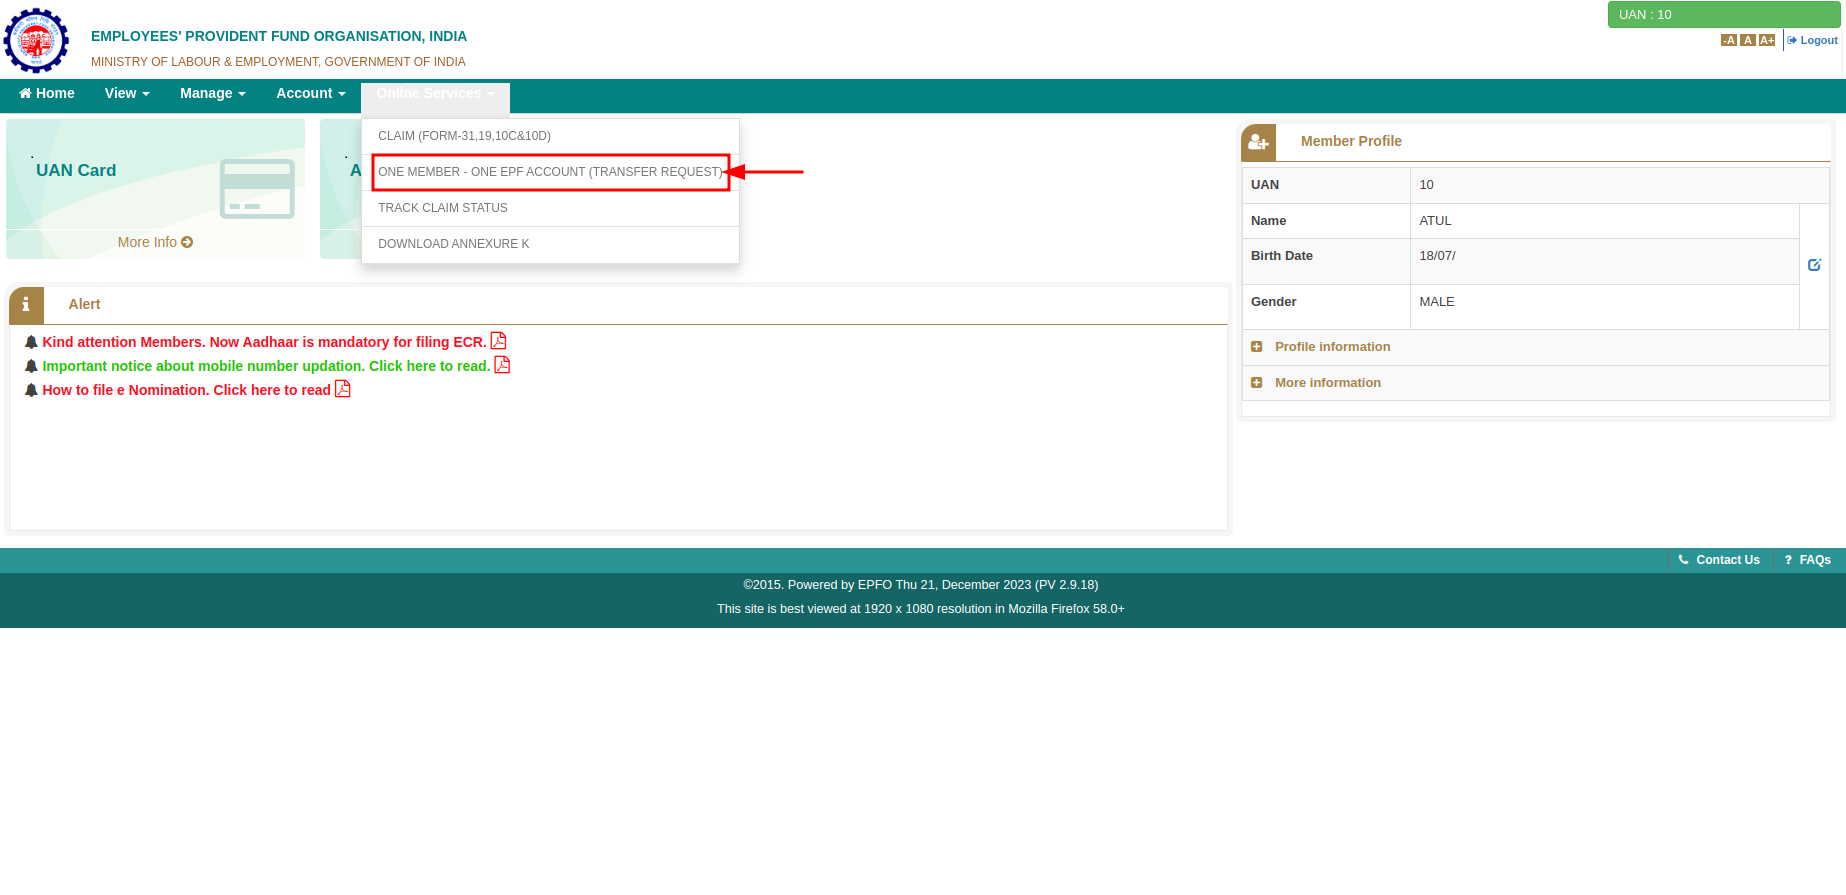 Step-2 select One Member–One EPF Account